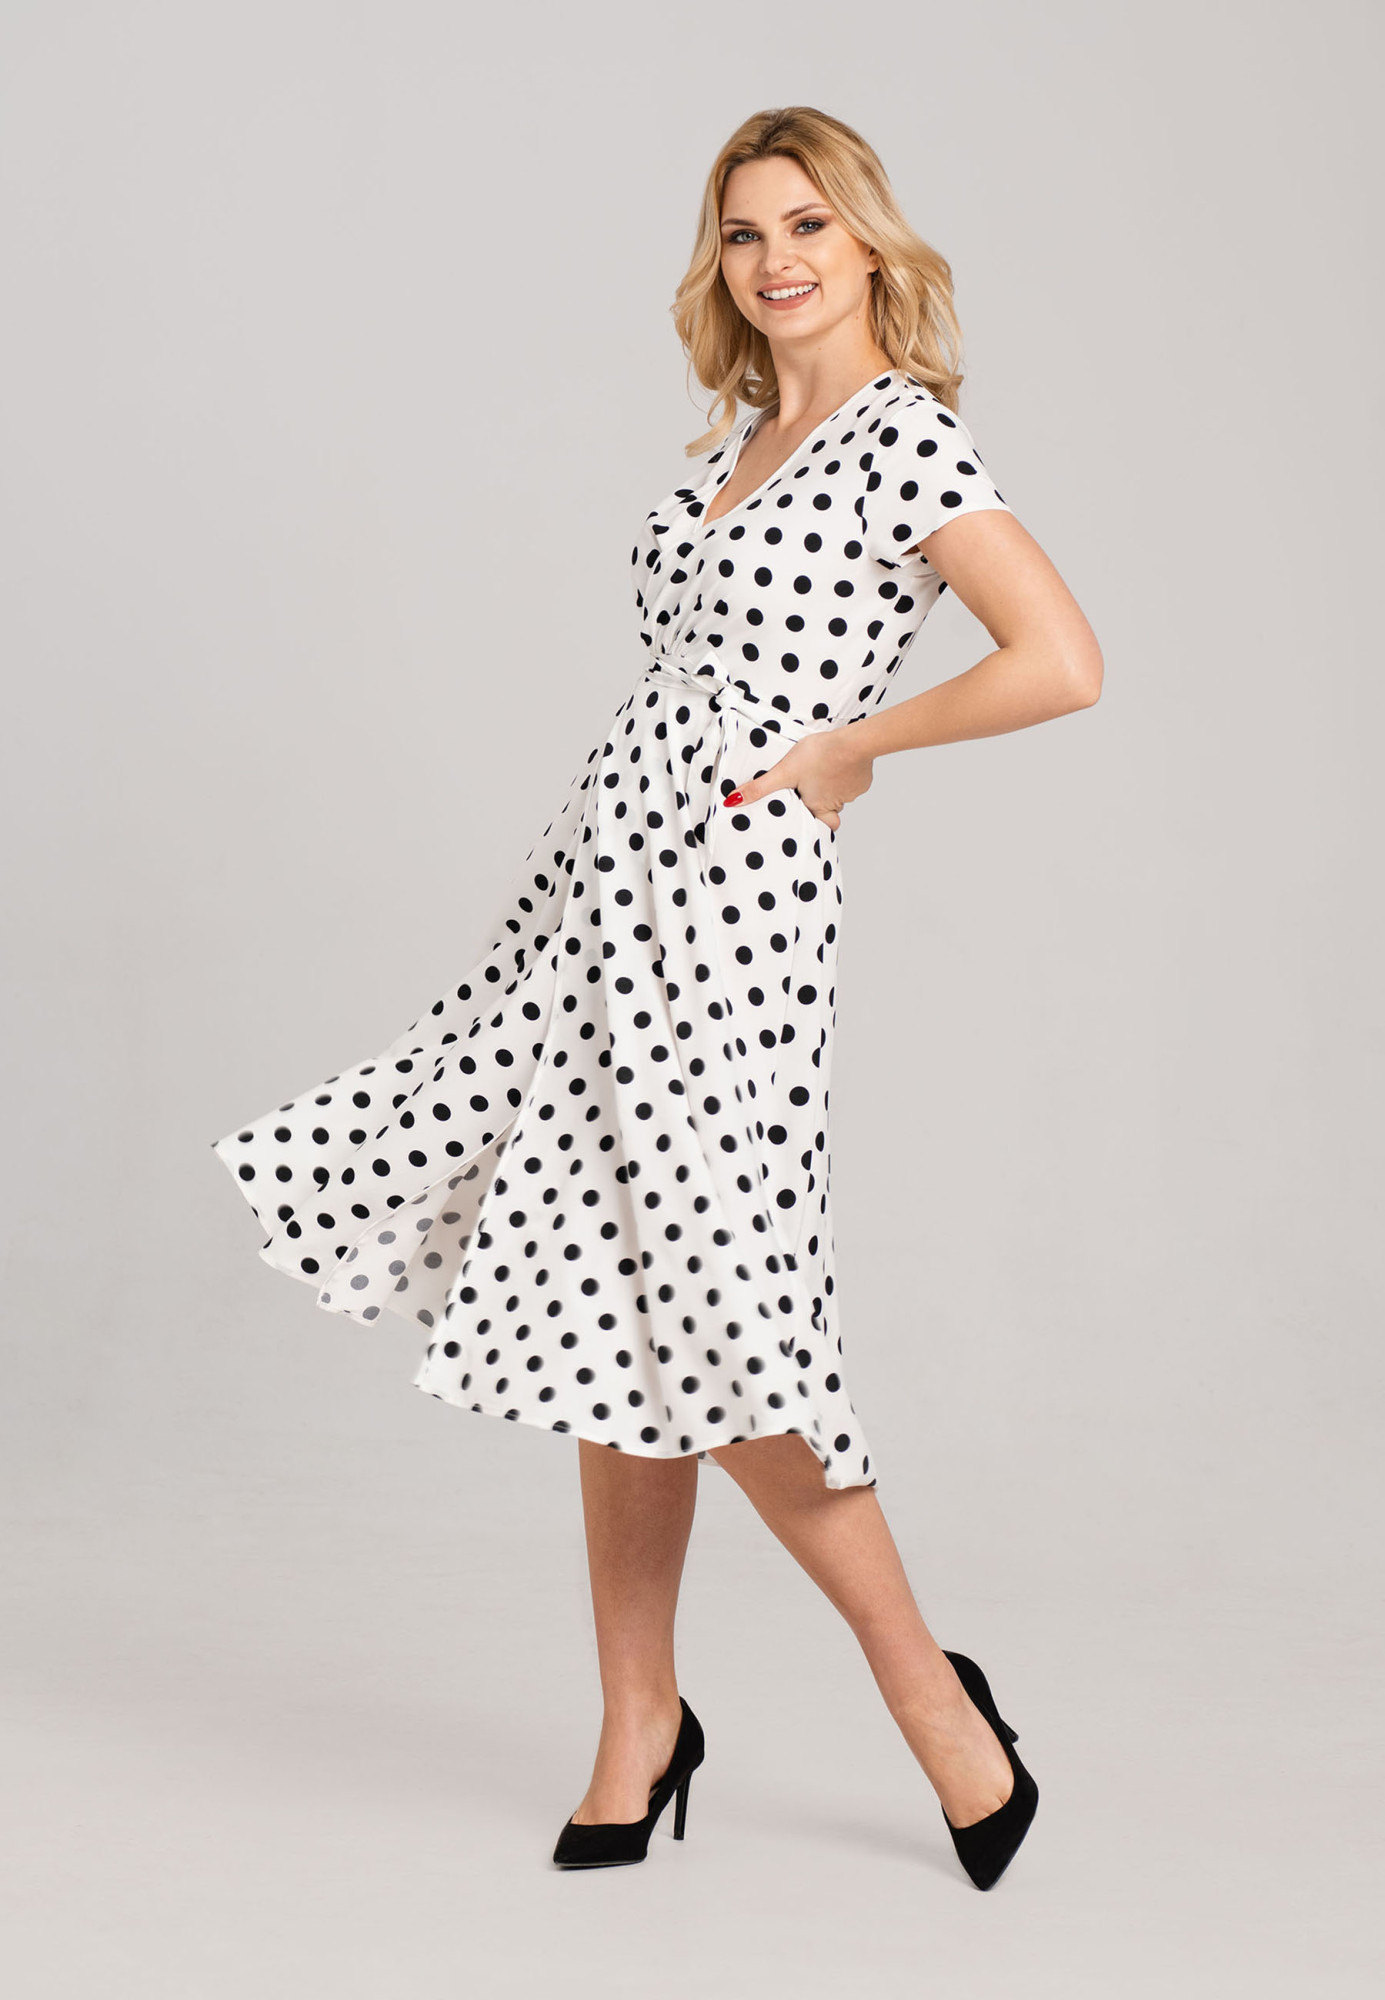 Look Made With Love Šaty N20 Polka Dots Black/White L